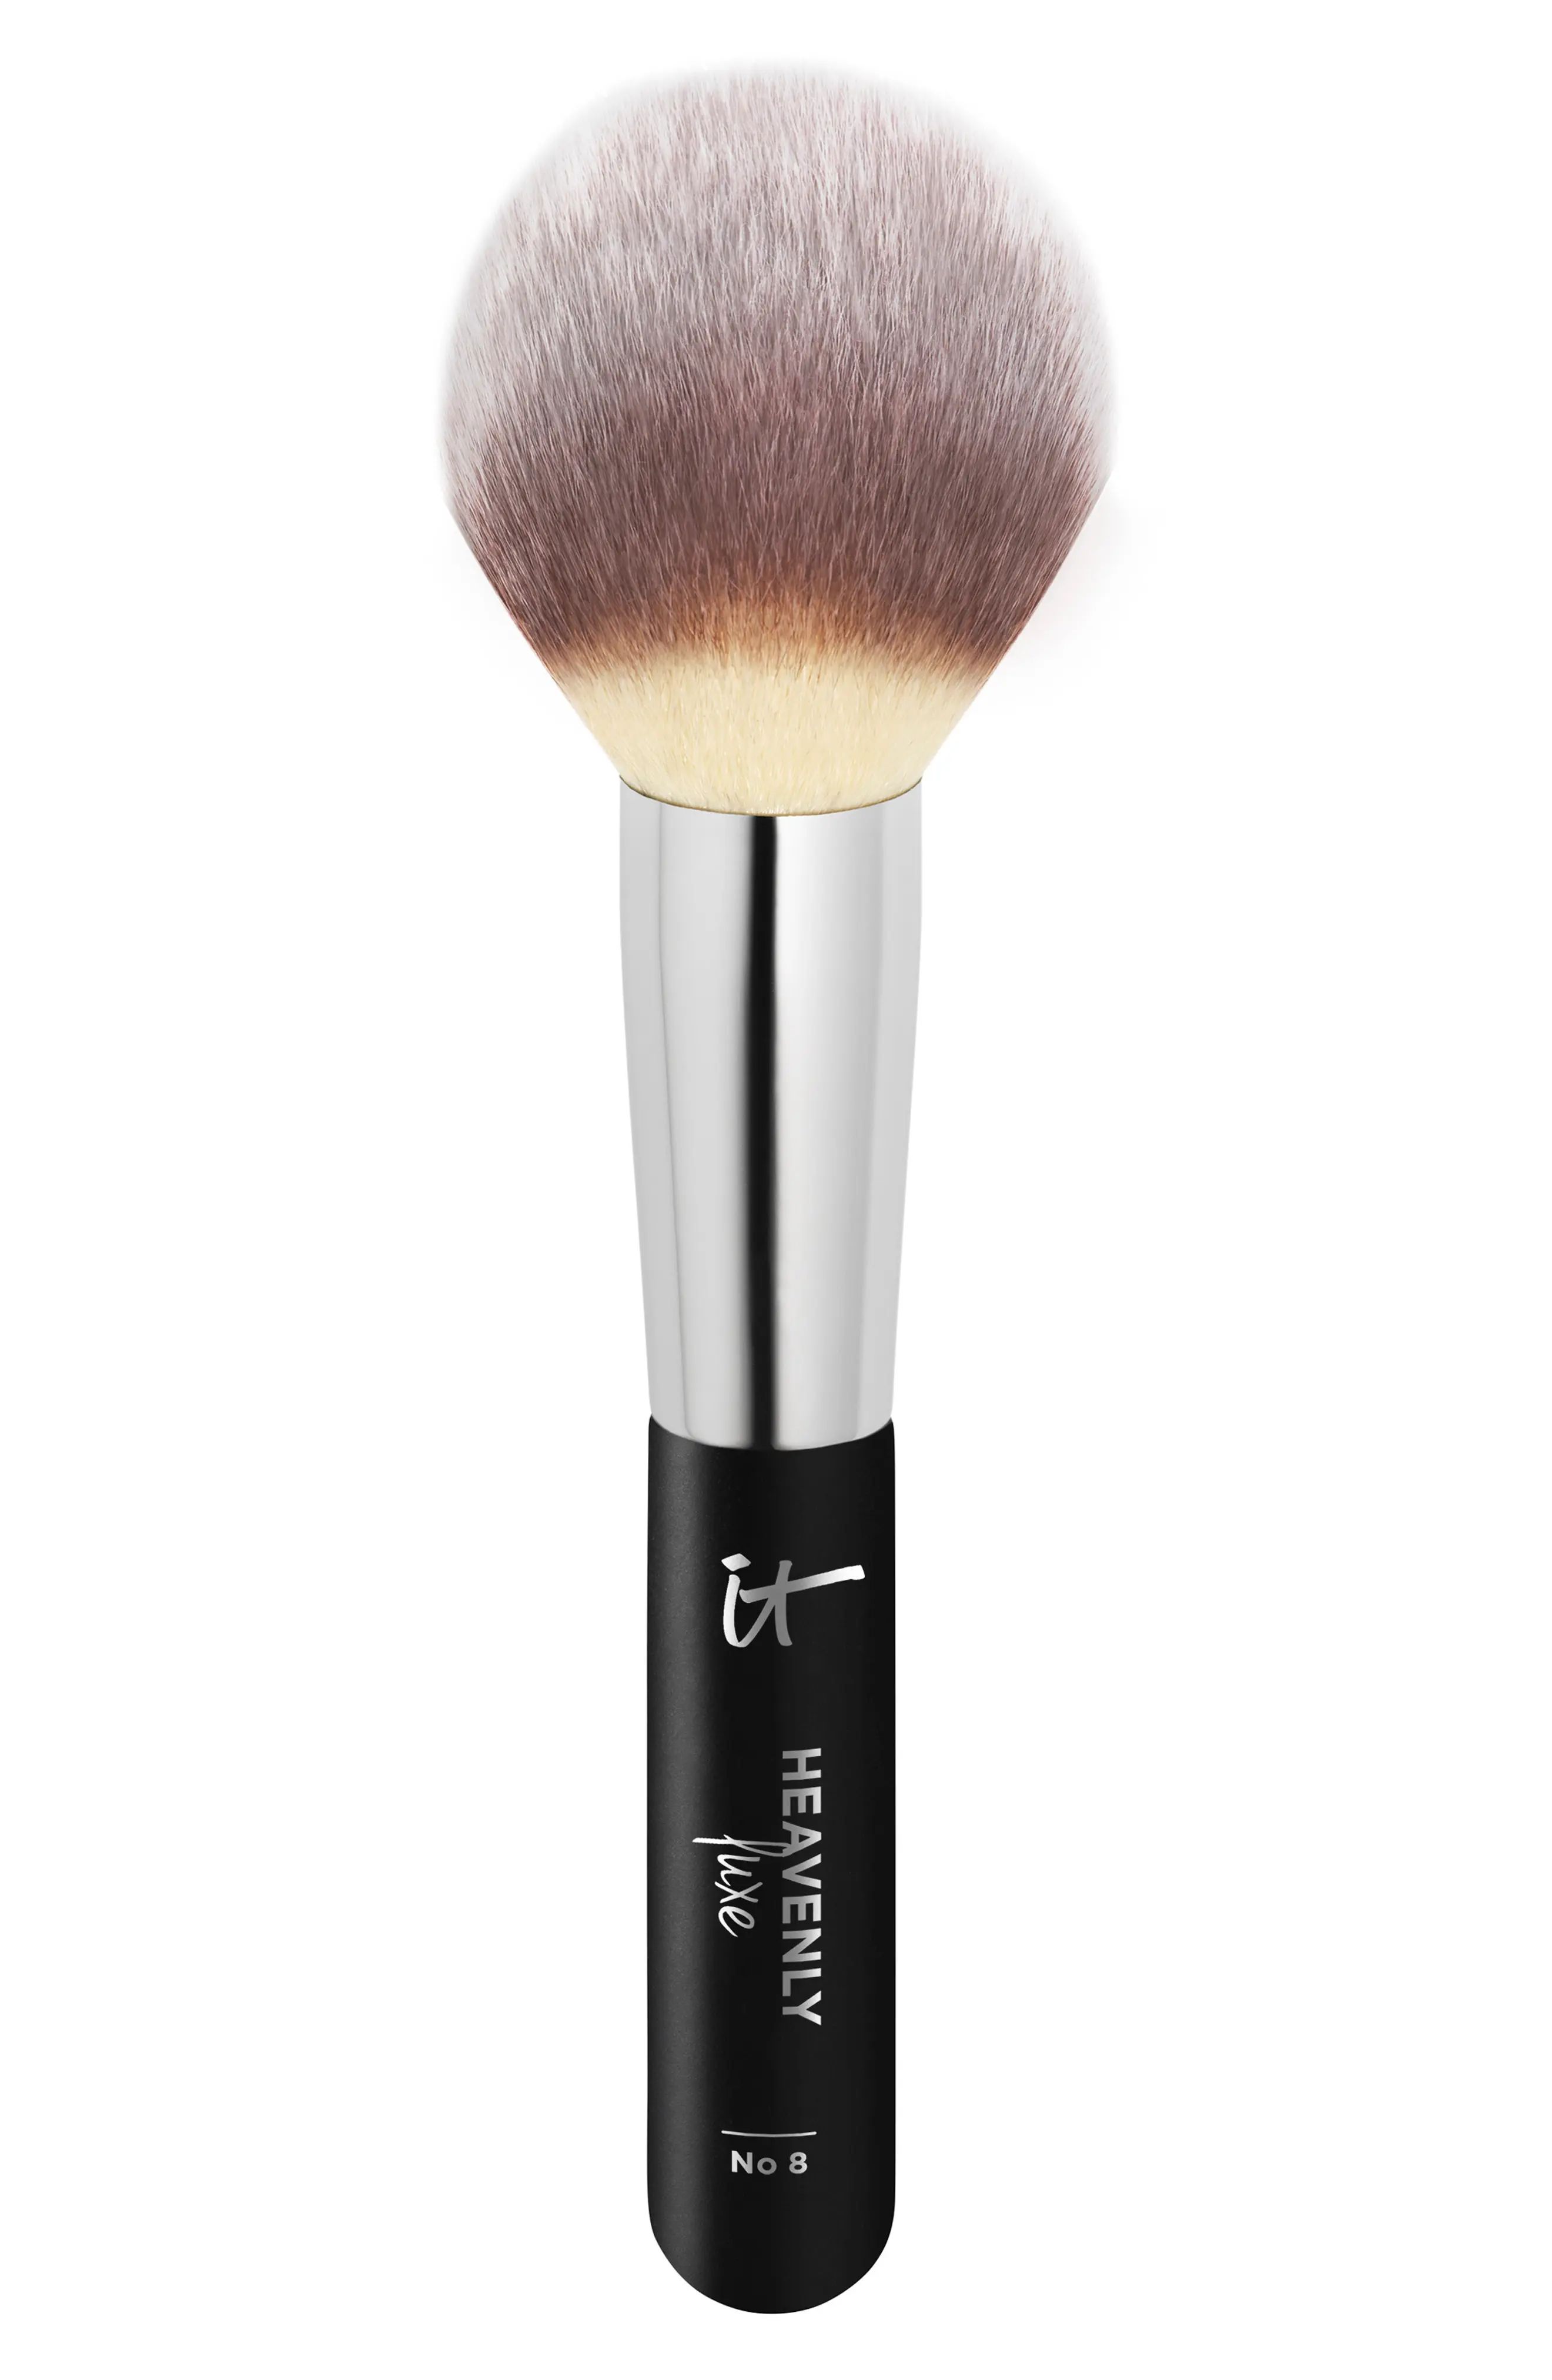 It Cosmetics Heavenly Luxe Wand Ball Powder Brush #8, Size One Size - No Color | Nordstrom